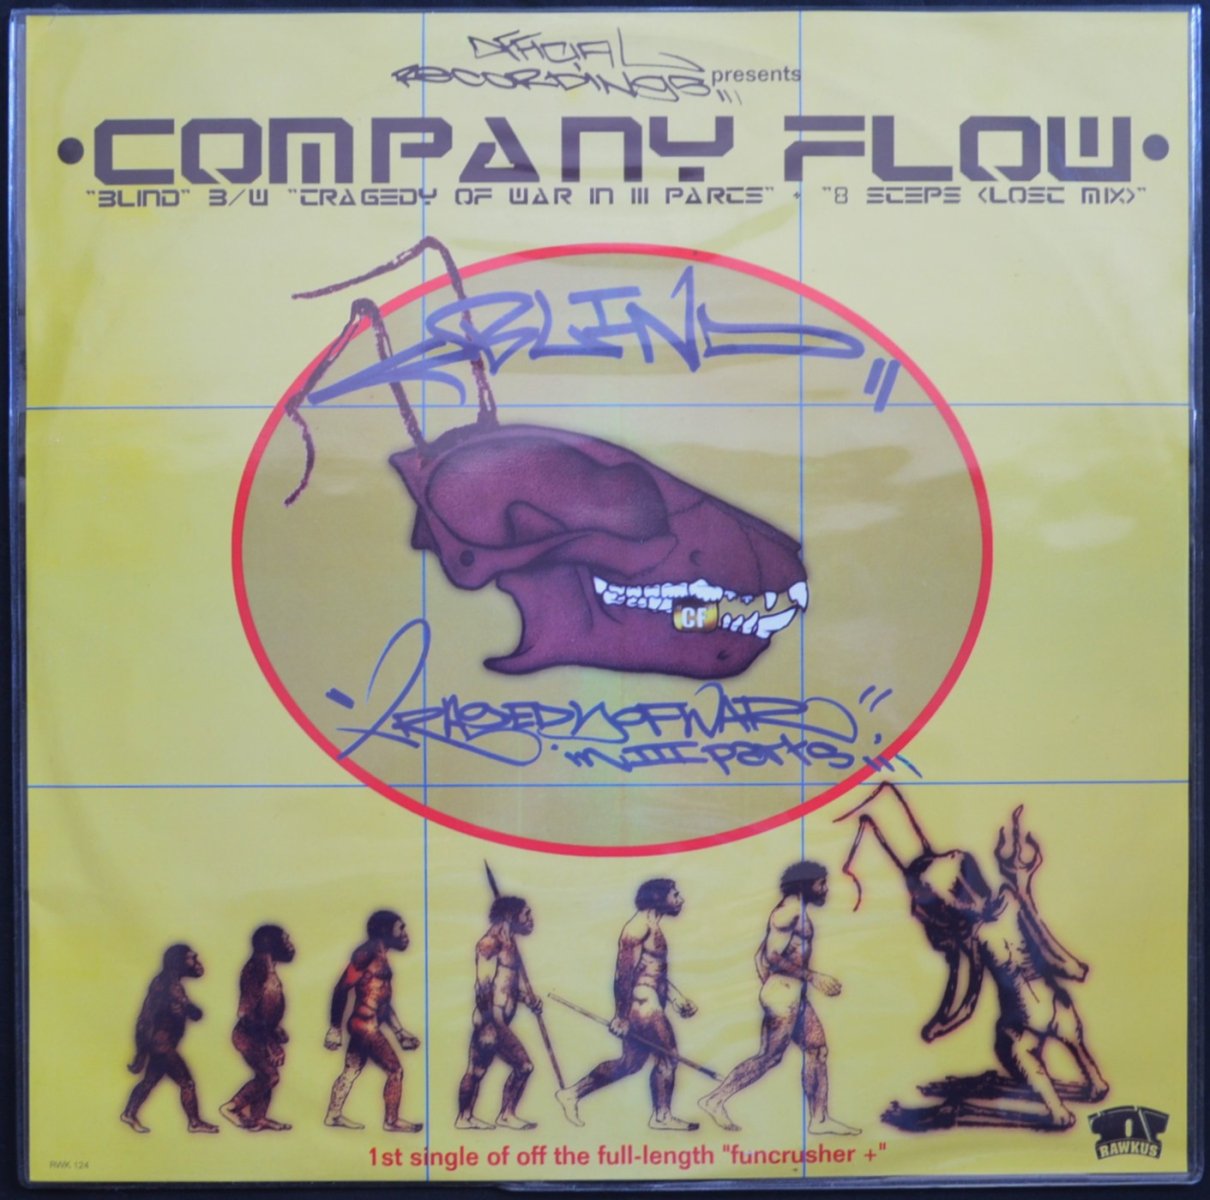 COMPANY FLOW / BLIND / TRAGEDY OF WAR IN III PARTS (12